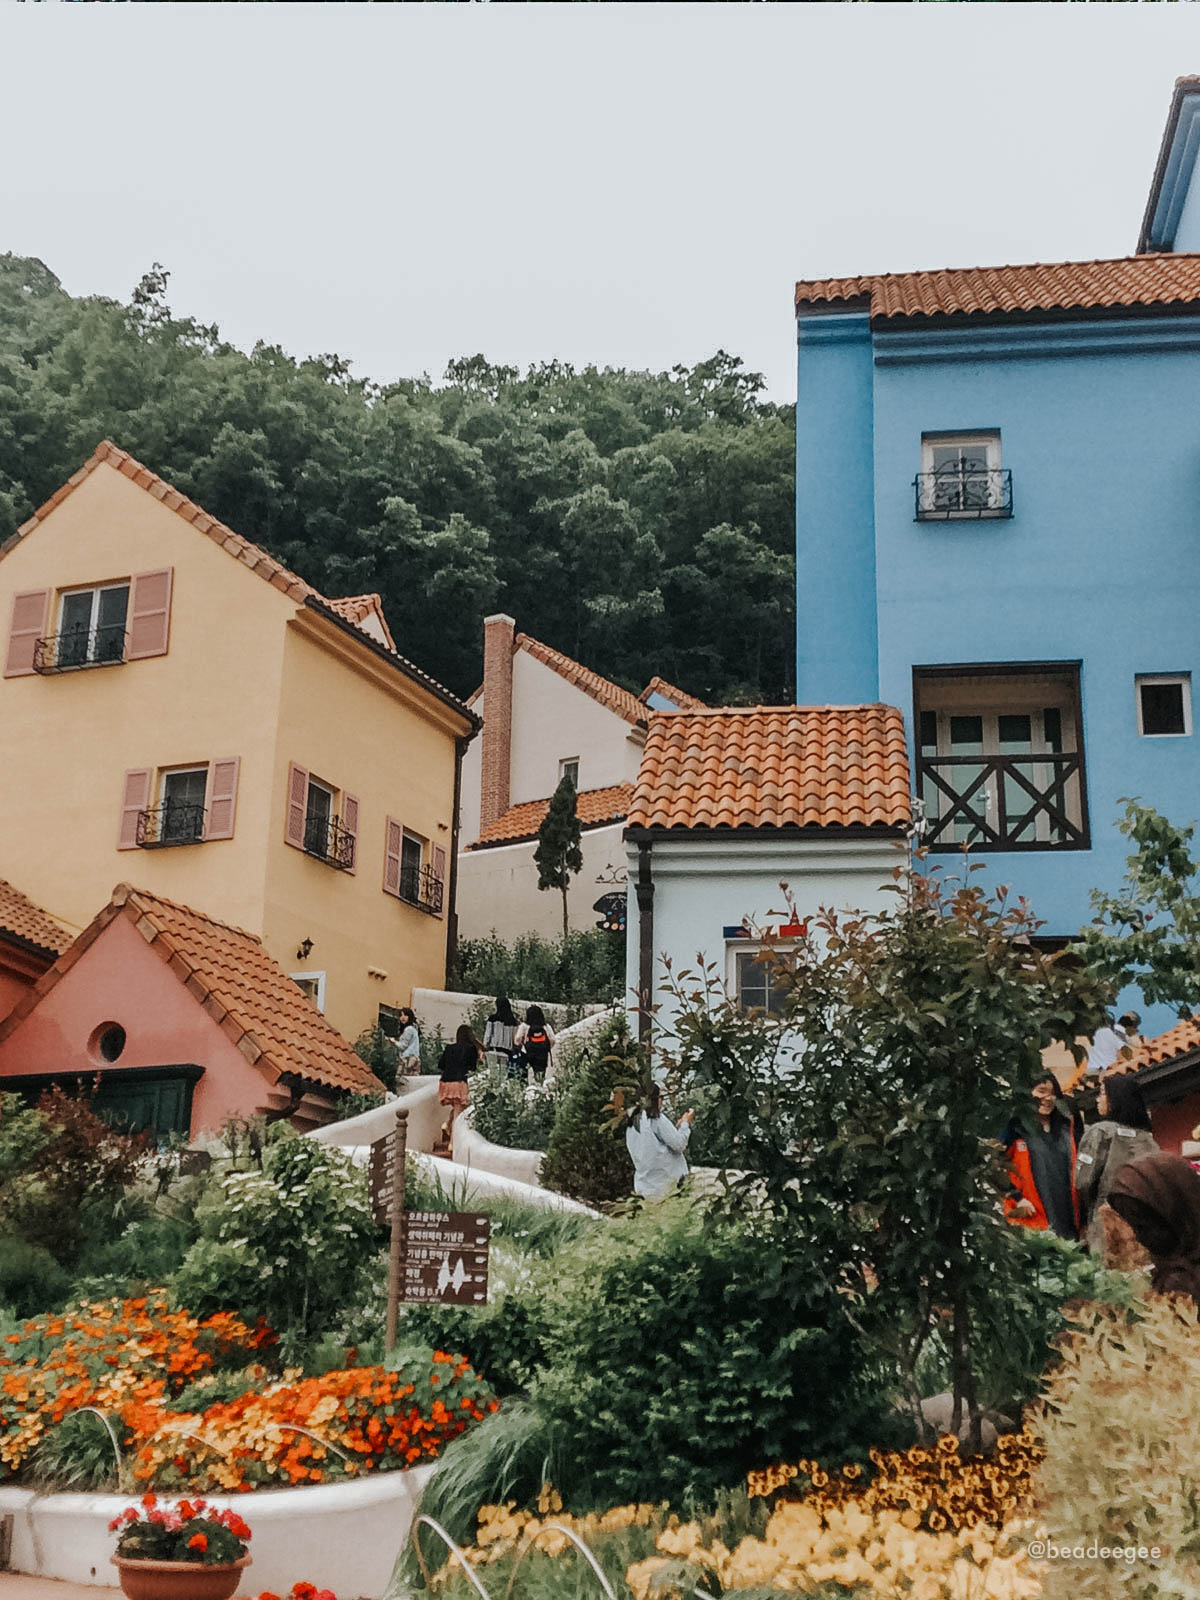 The colorful houses of Petite France